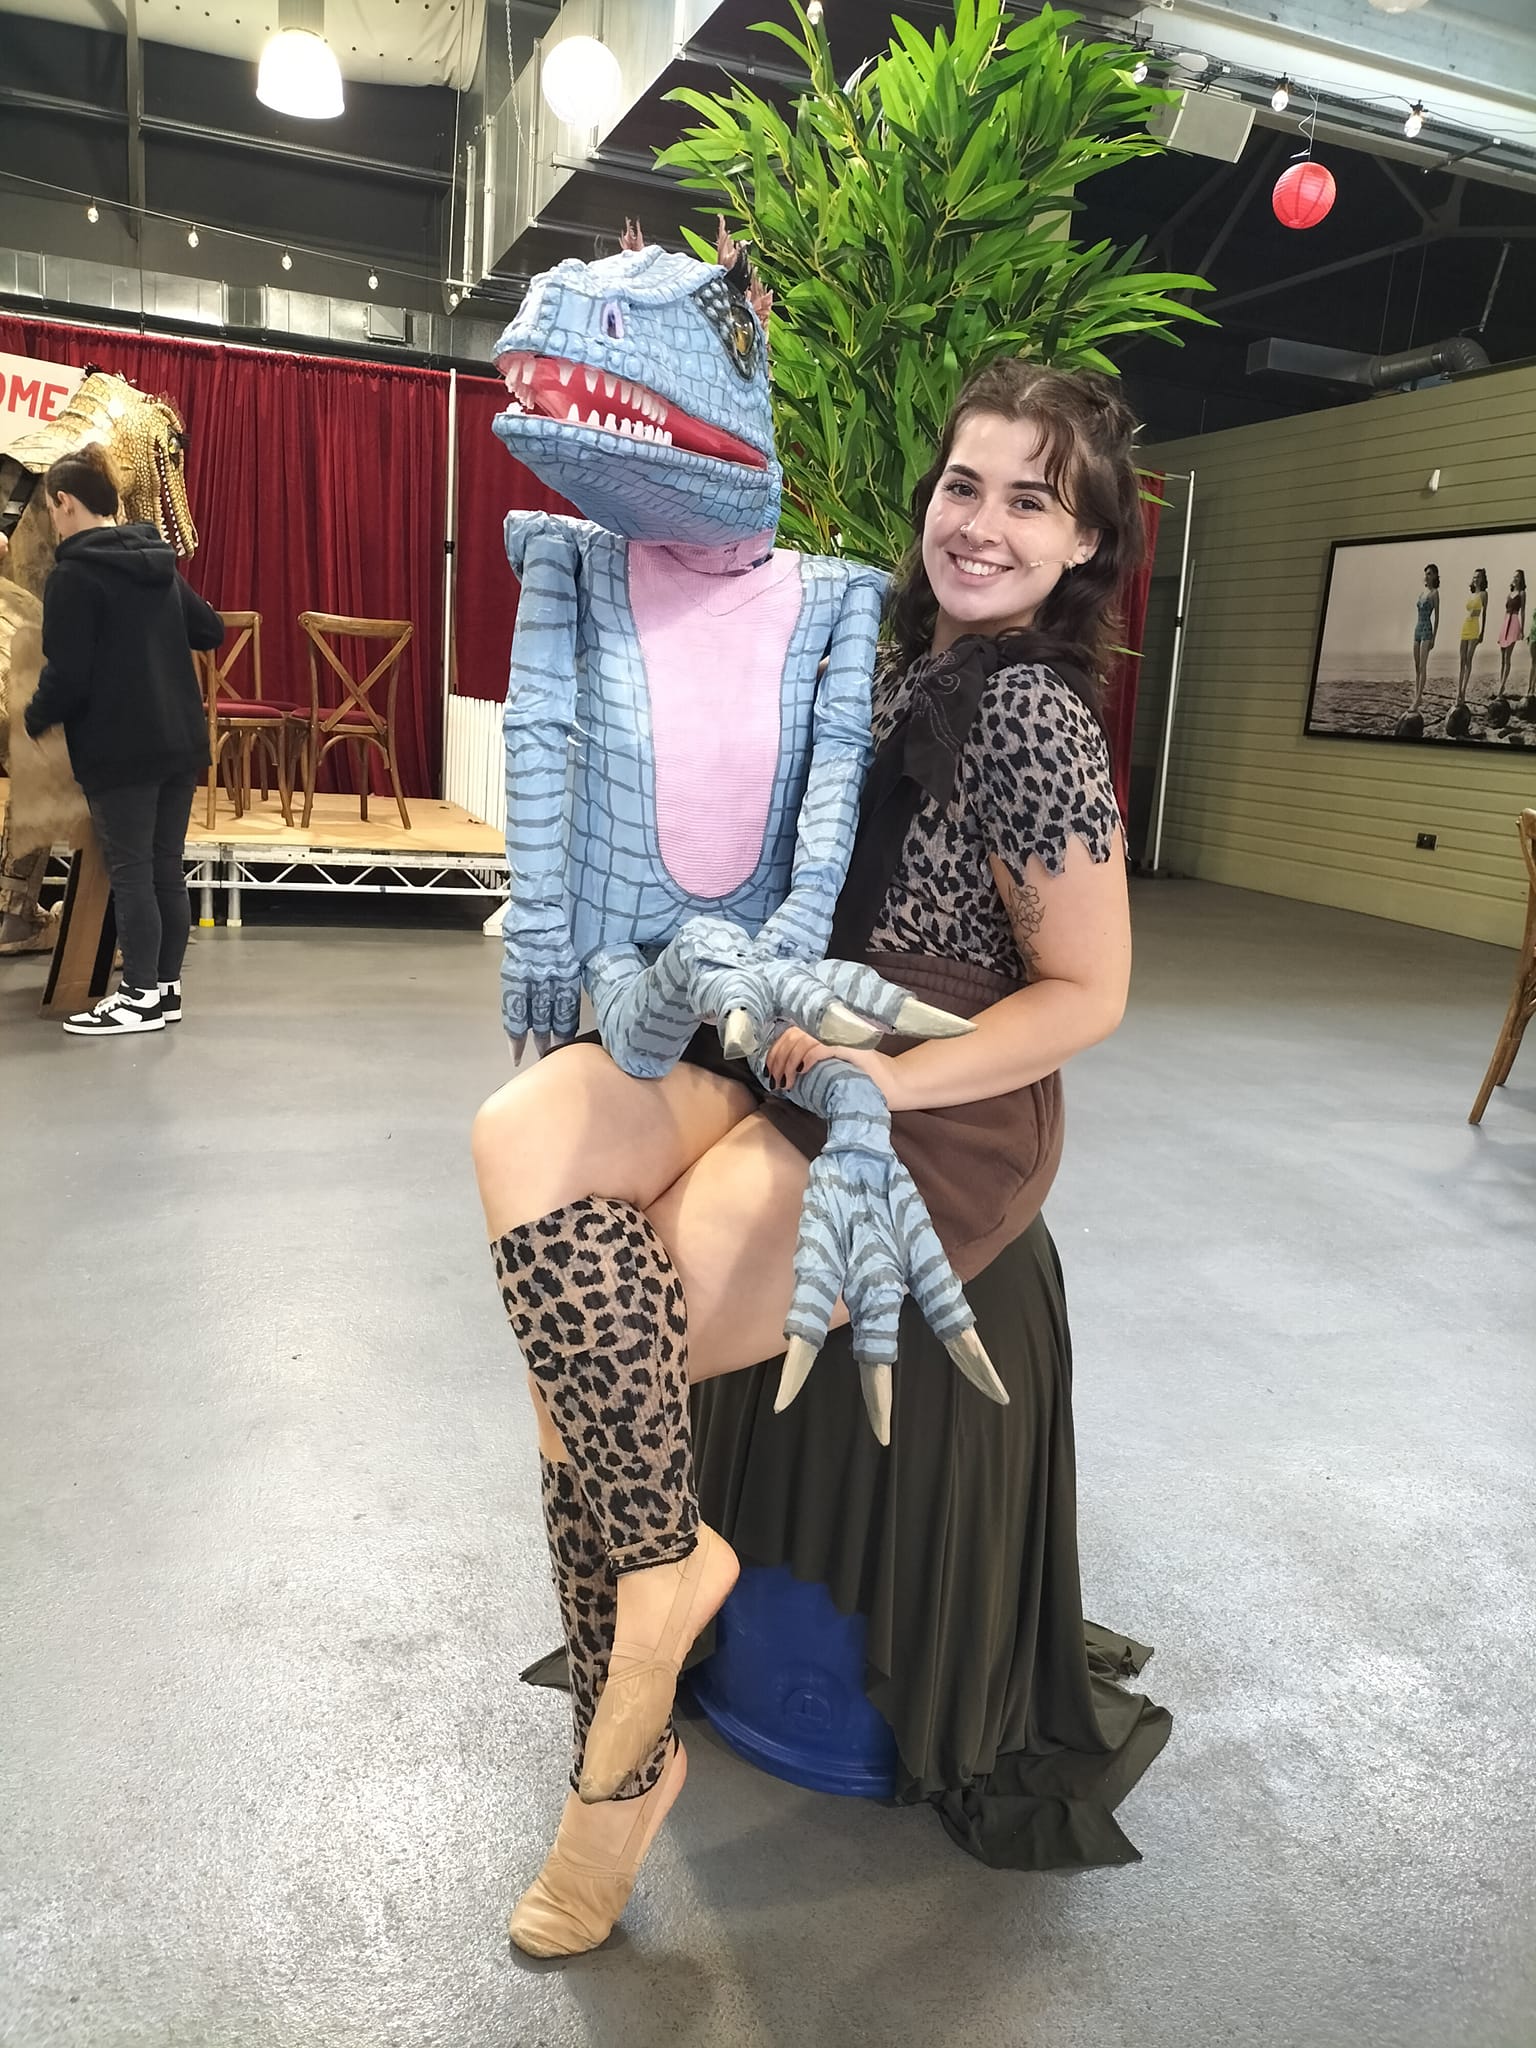 Vera and the Velociraptor is coming to Southport Market